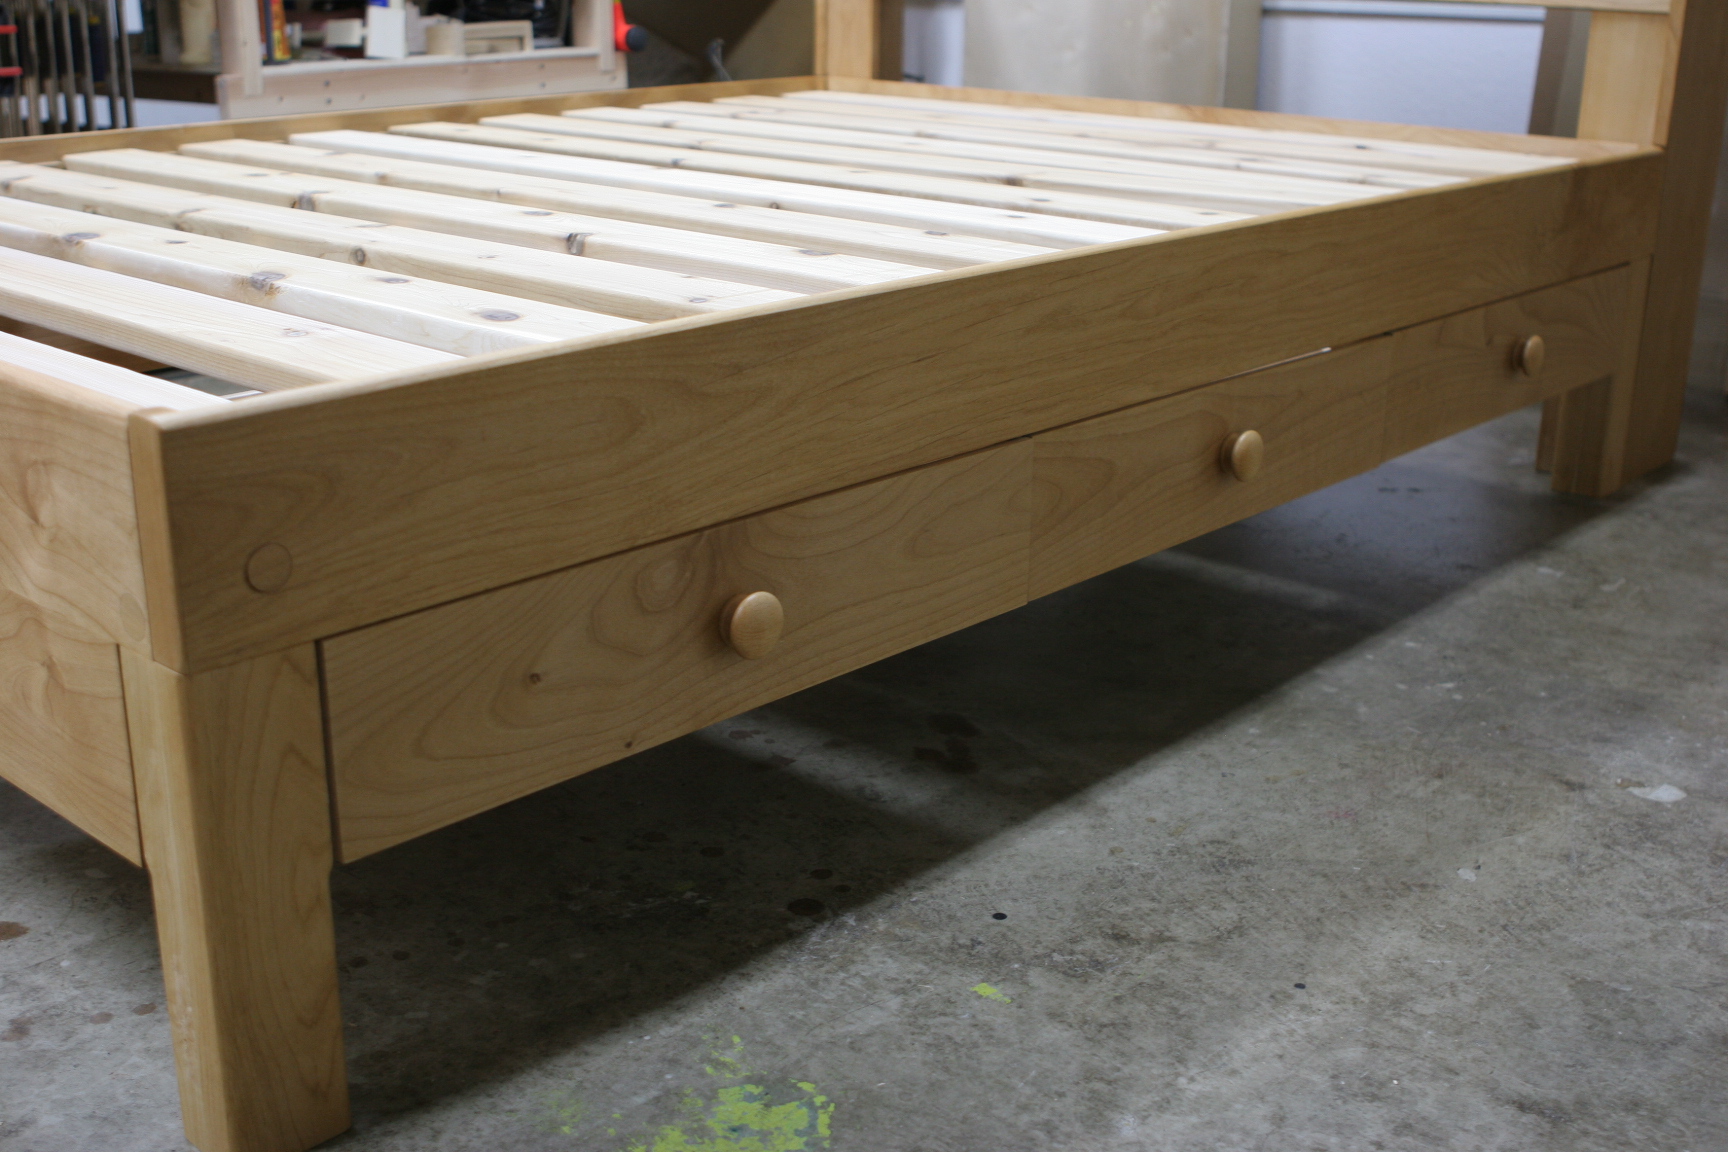 Alder full/double with 3 drawers, storage headboard